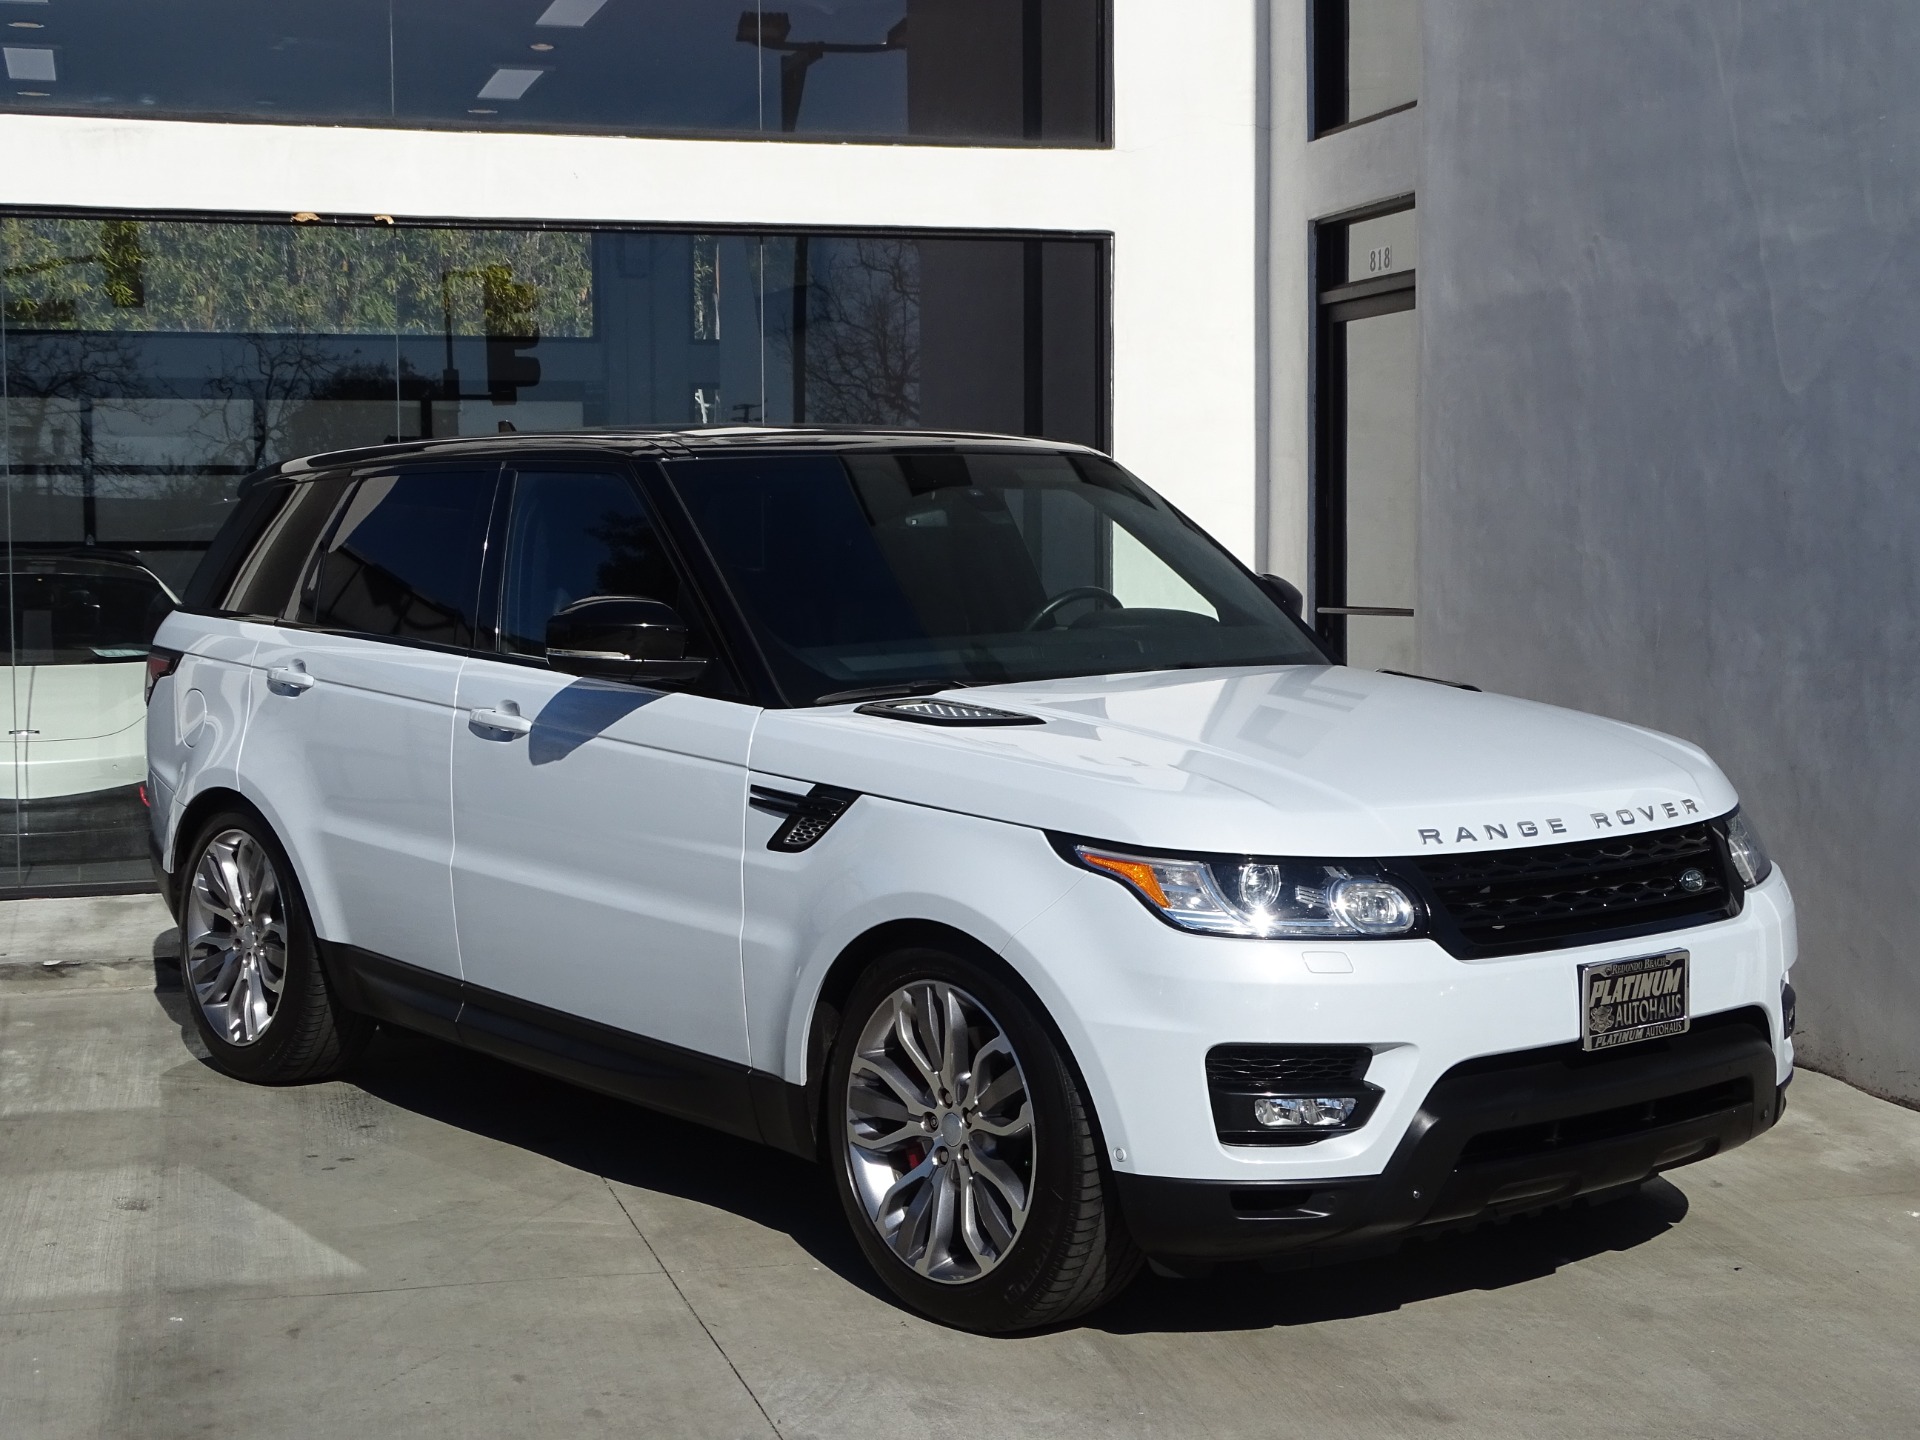 Uitvoerder Vleugels Lucky 2015 Land Rover Range Rover Sport Supercharged Limited Edition Stock # 6841  for sale near Redondo Beach, CA | CA Land Rover Dealer